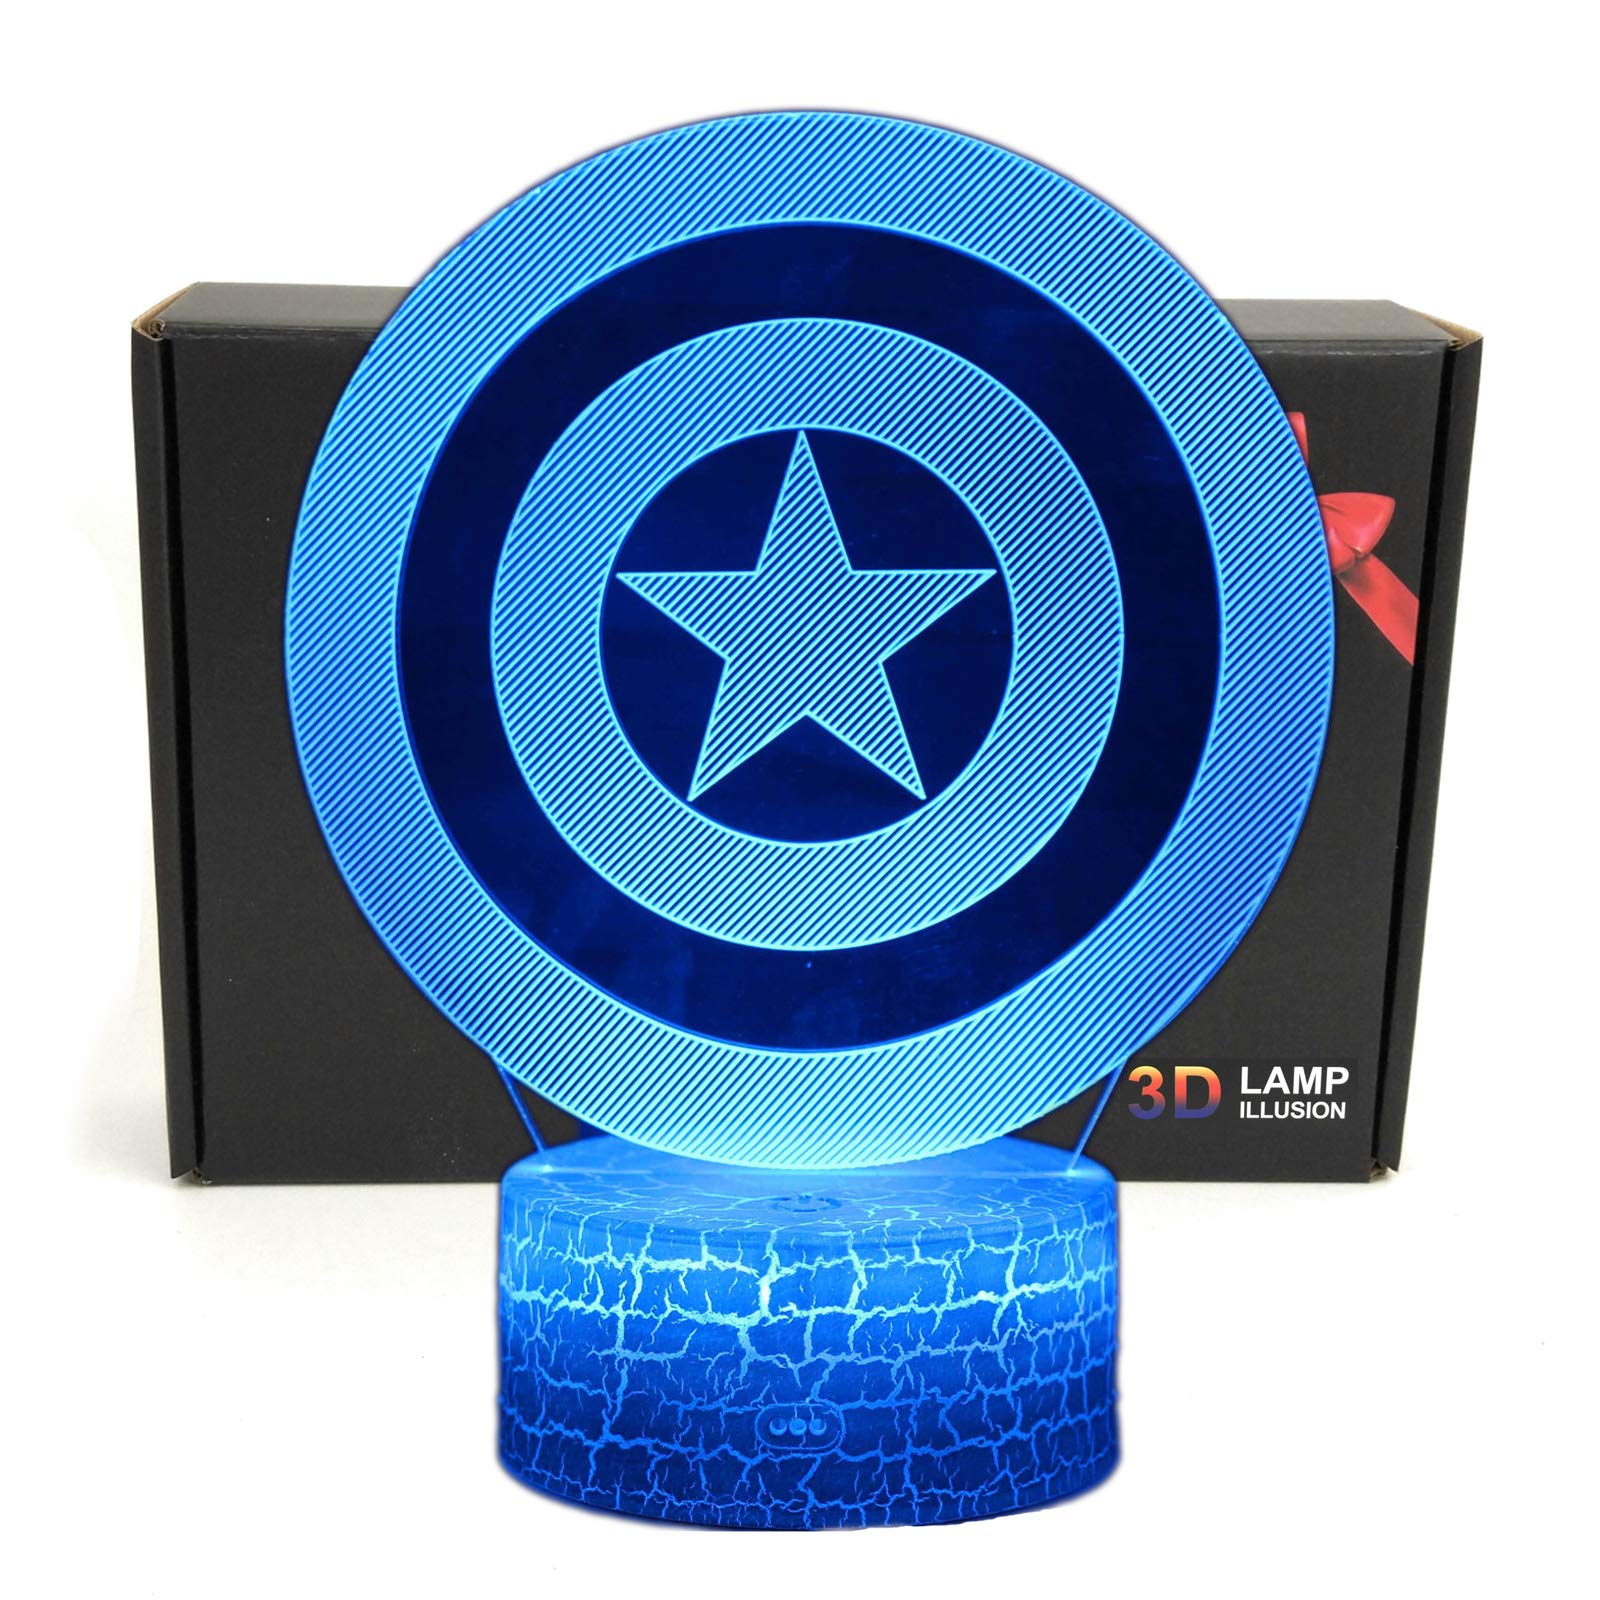 Book Cover LED Superhero 3D Optical Illusion Smart 7 Colors Captain Night Light Table Lamp for Gifts with USB Power Cable